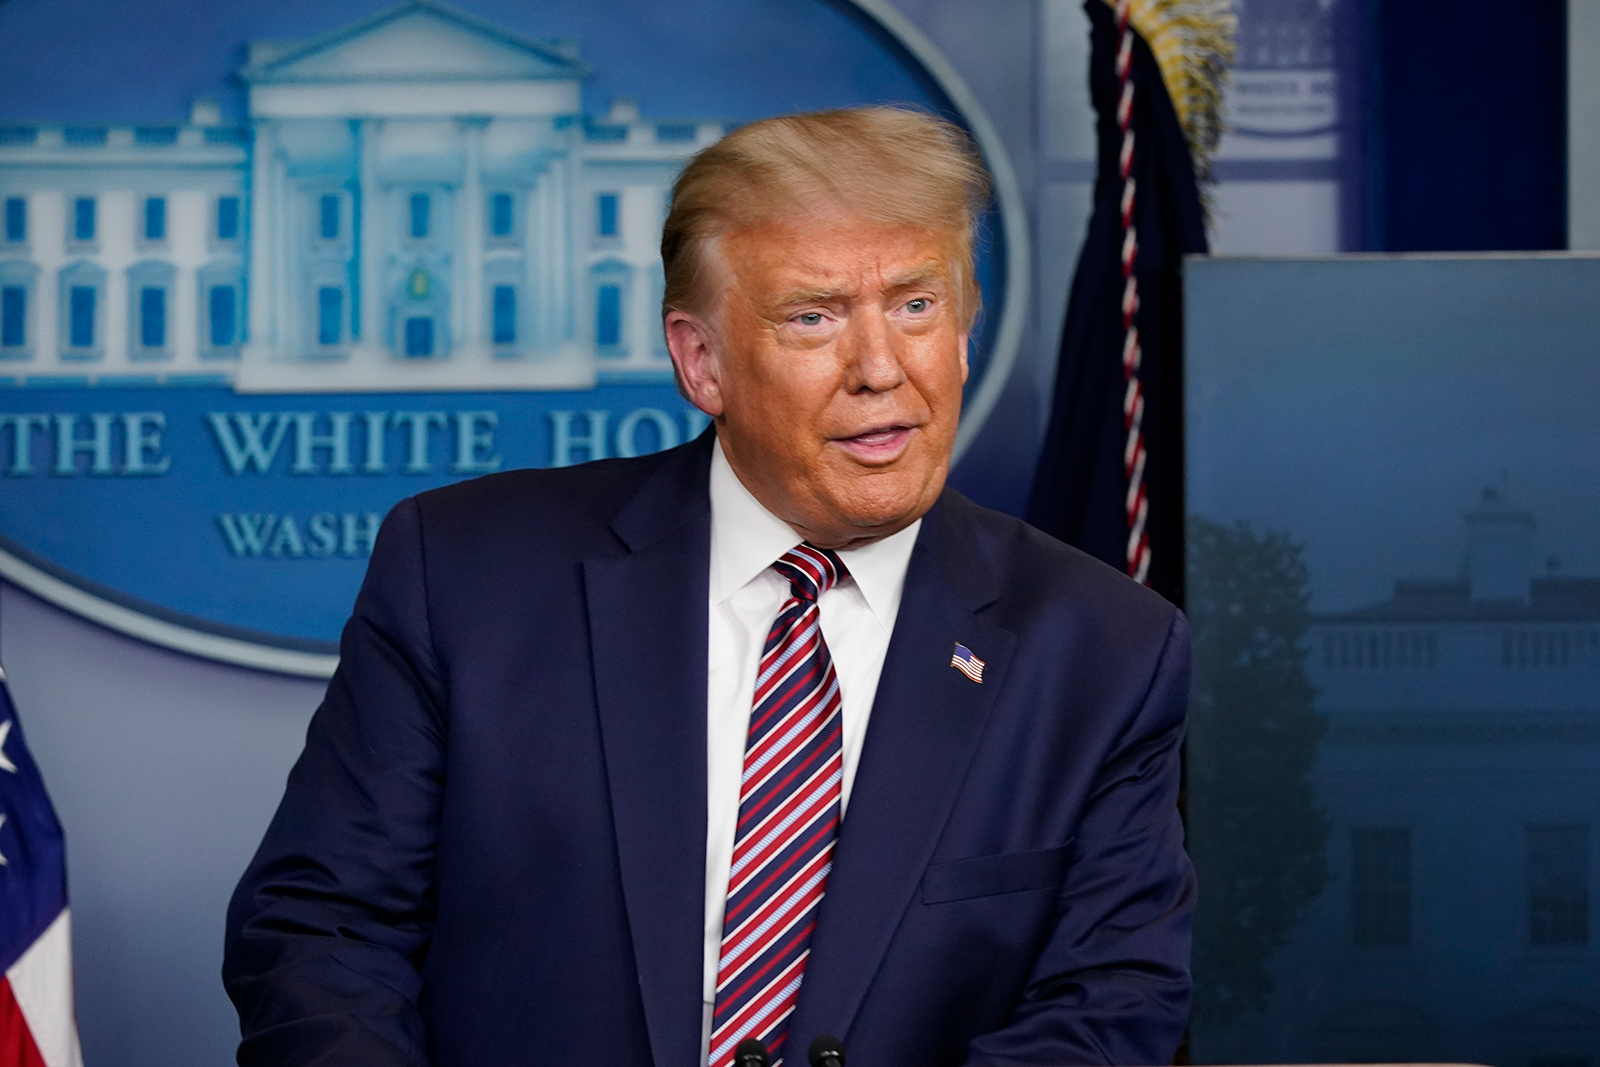 President Donald Trump speaks at a news conference in the James Brady Press Briefing Room at the White House, Wednesday, Aug. 12 in Washington.